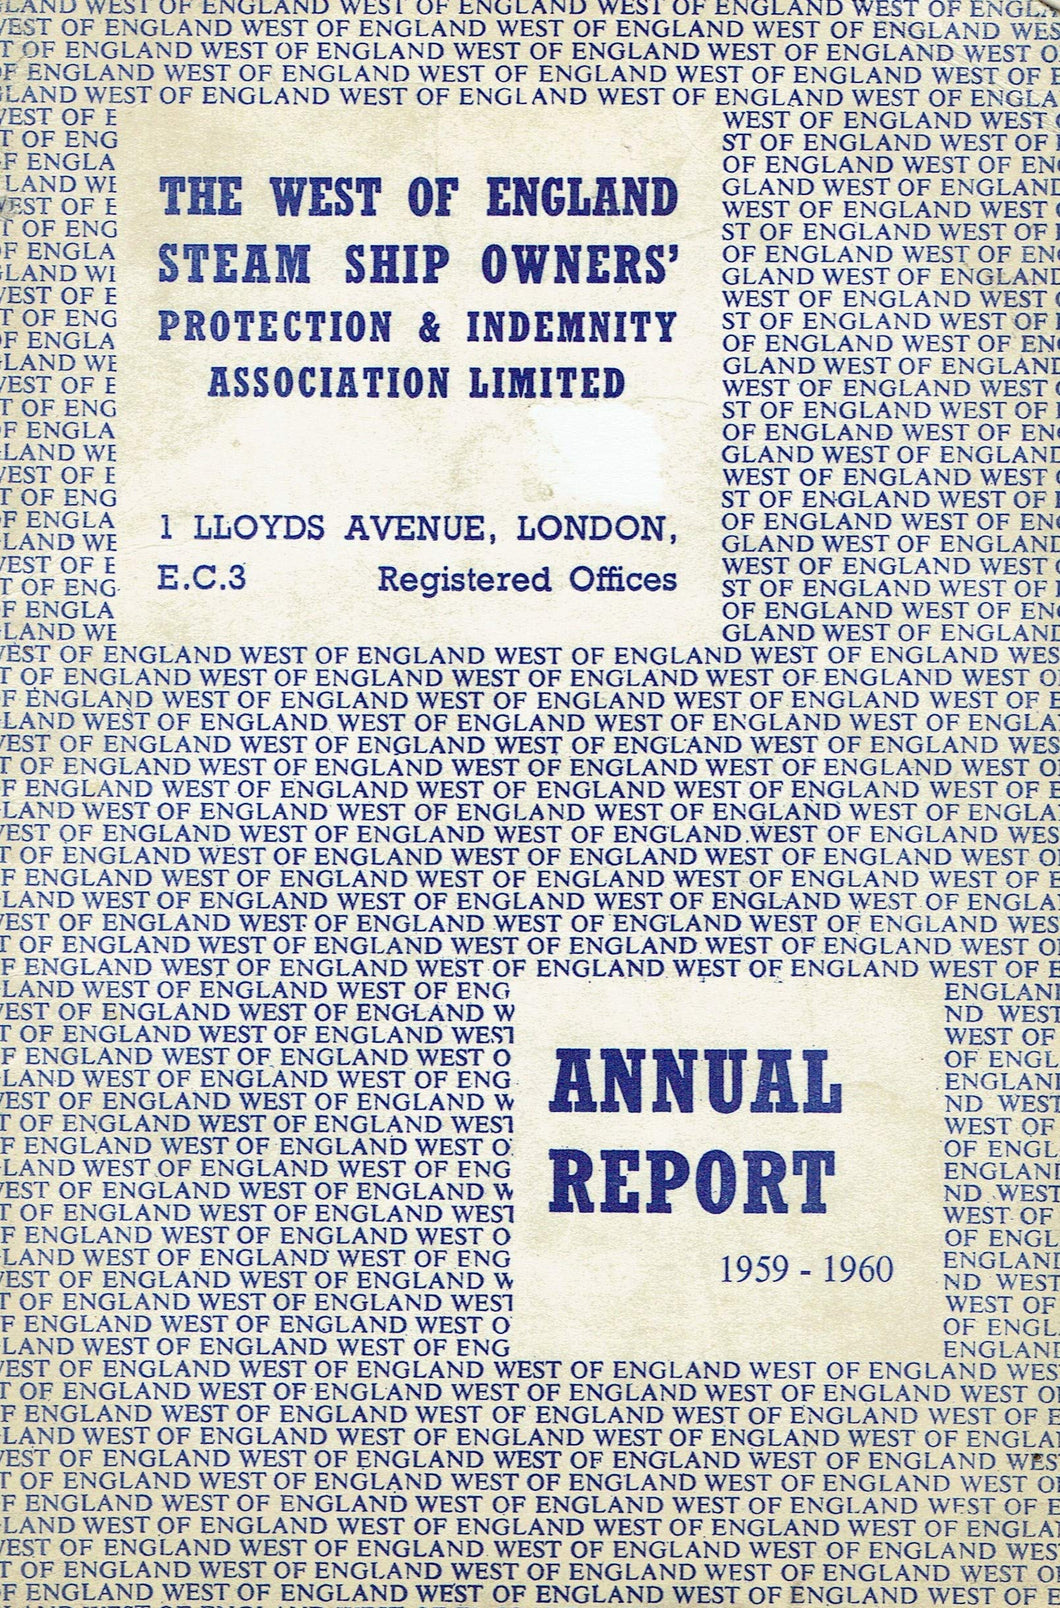 The West of England Steam Ship Owners' Protection and Indemnity Association Limited Annual Report 1959-1960